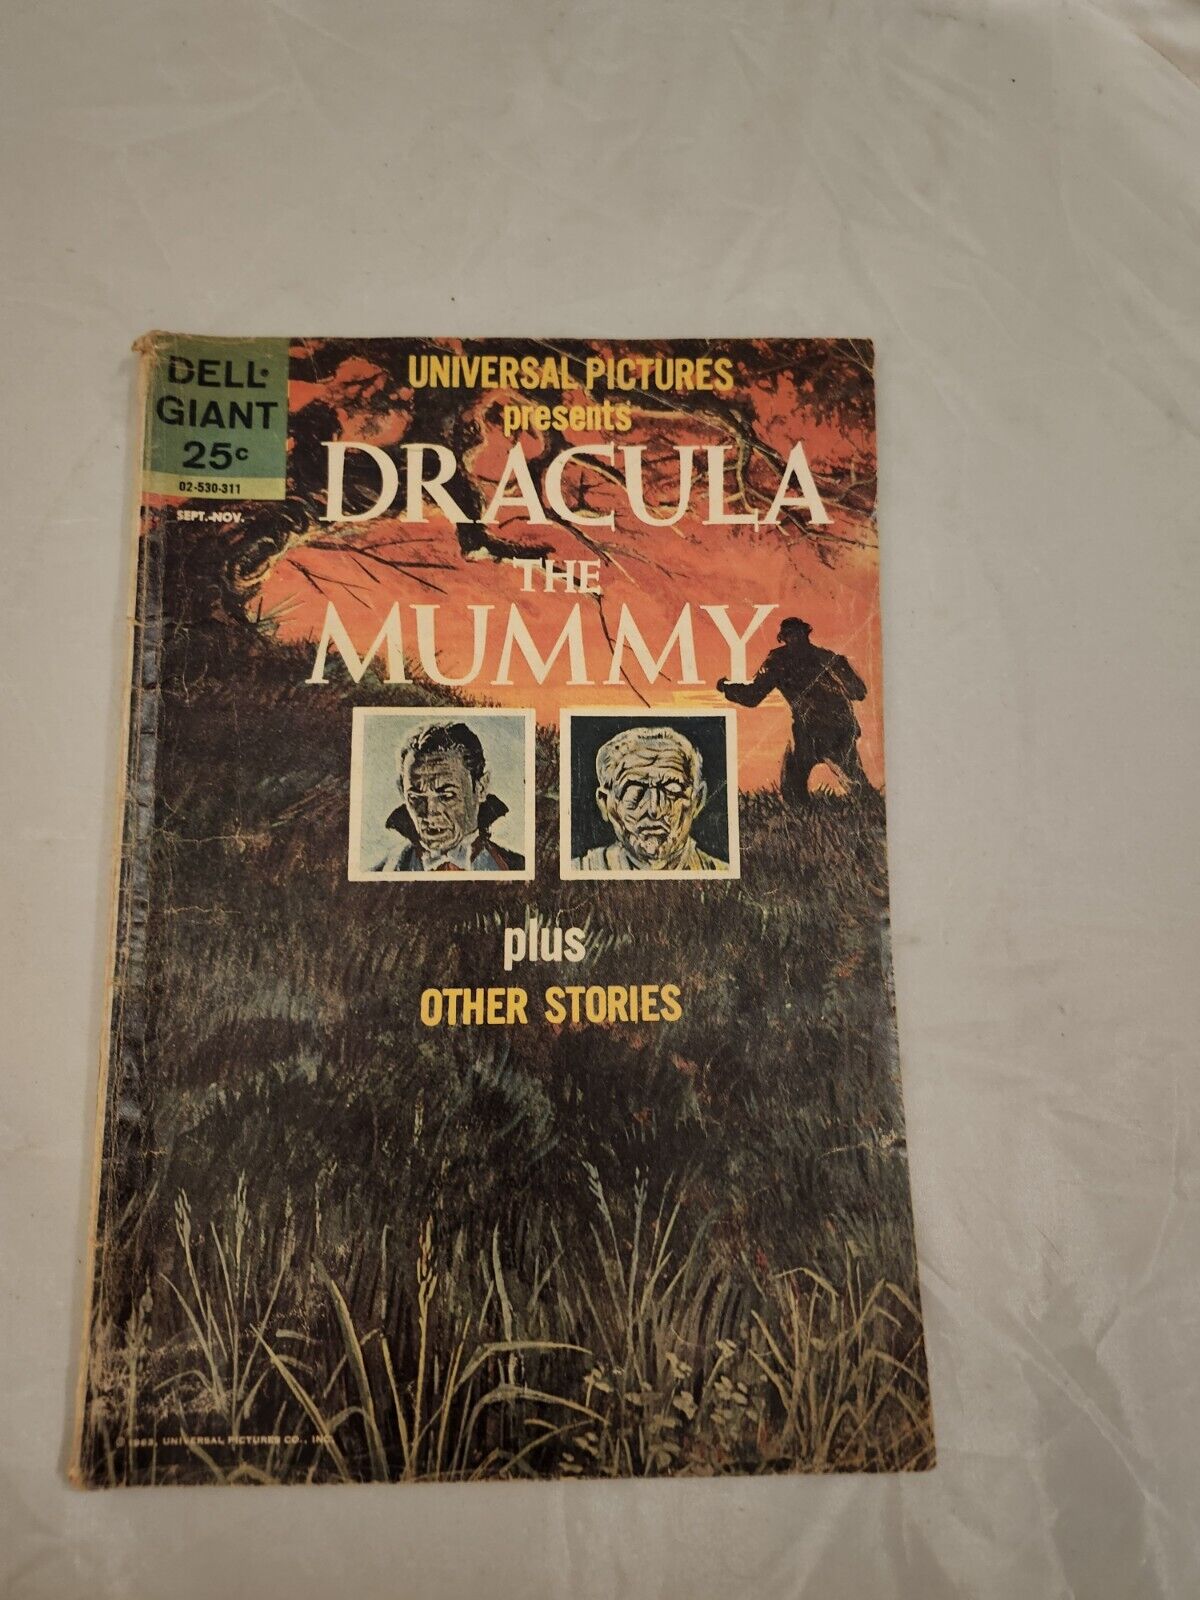 Universal Pictures Presents Dracula The Mummy (1963) Dell Giant G